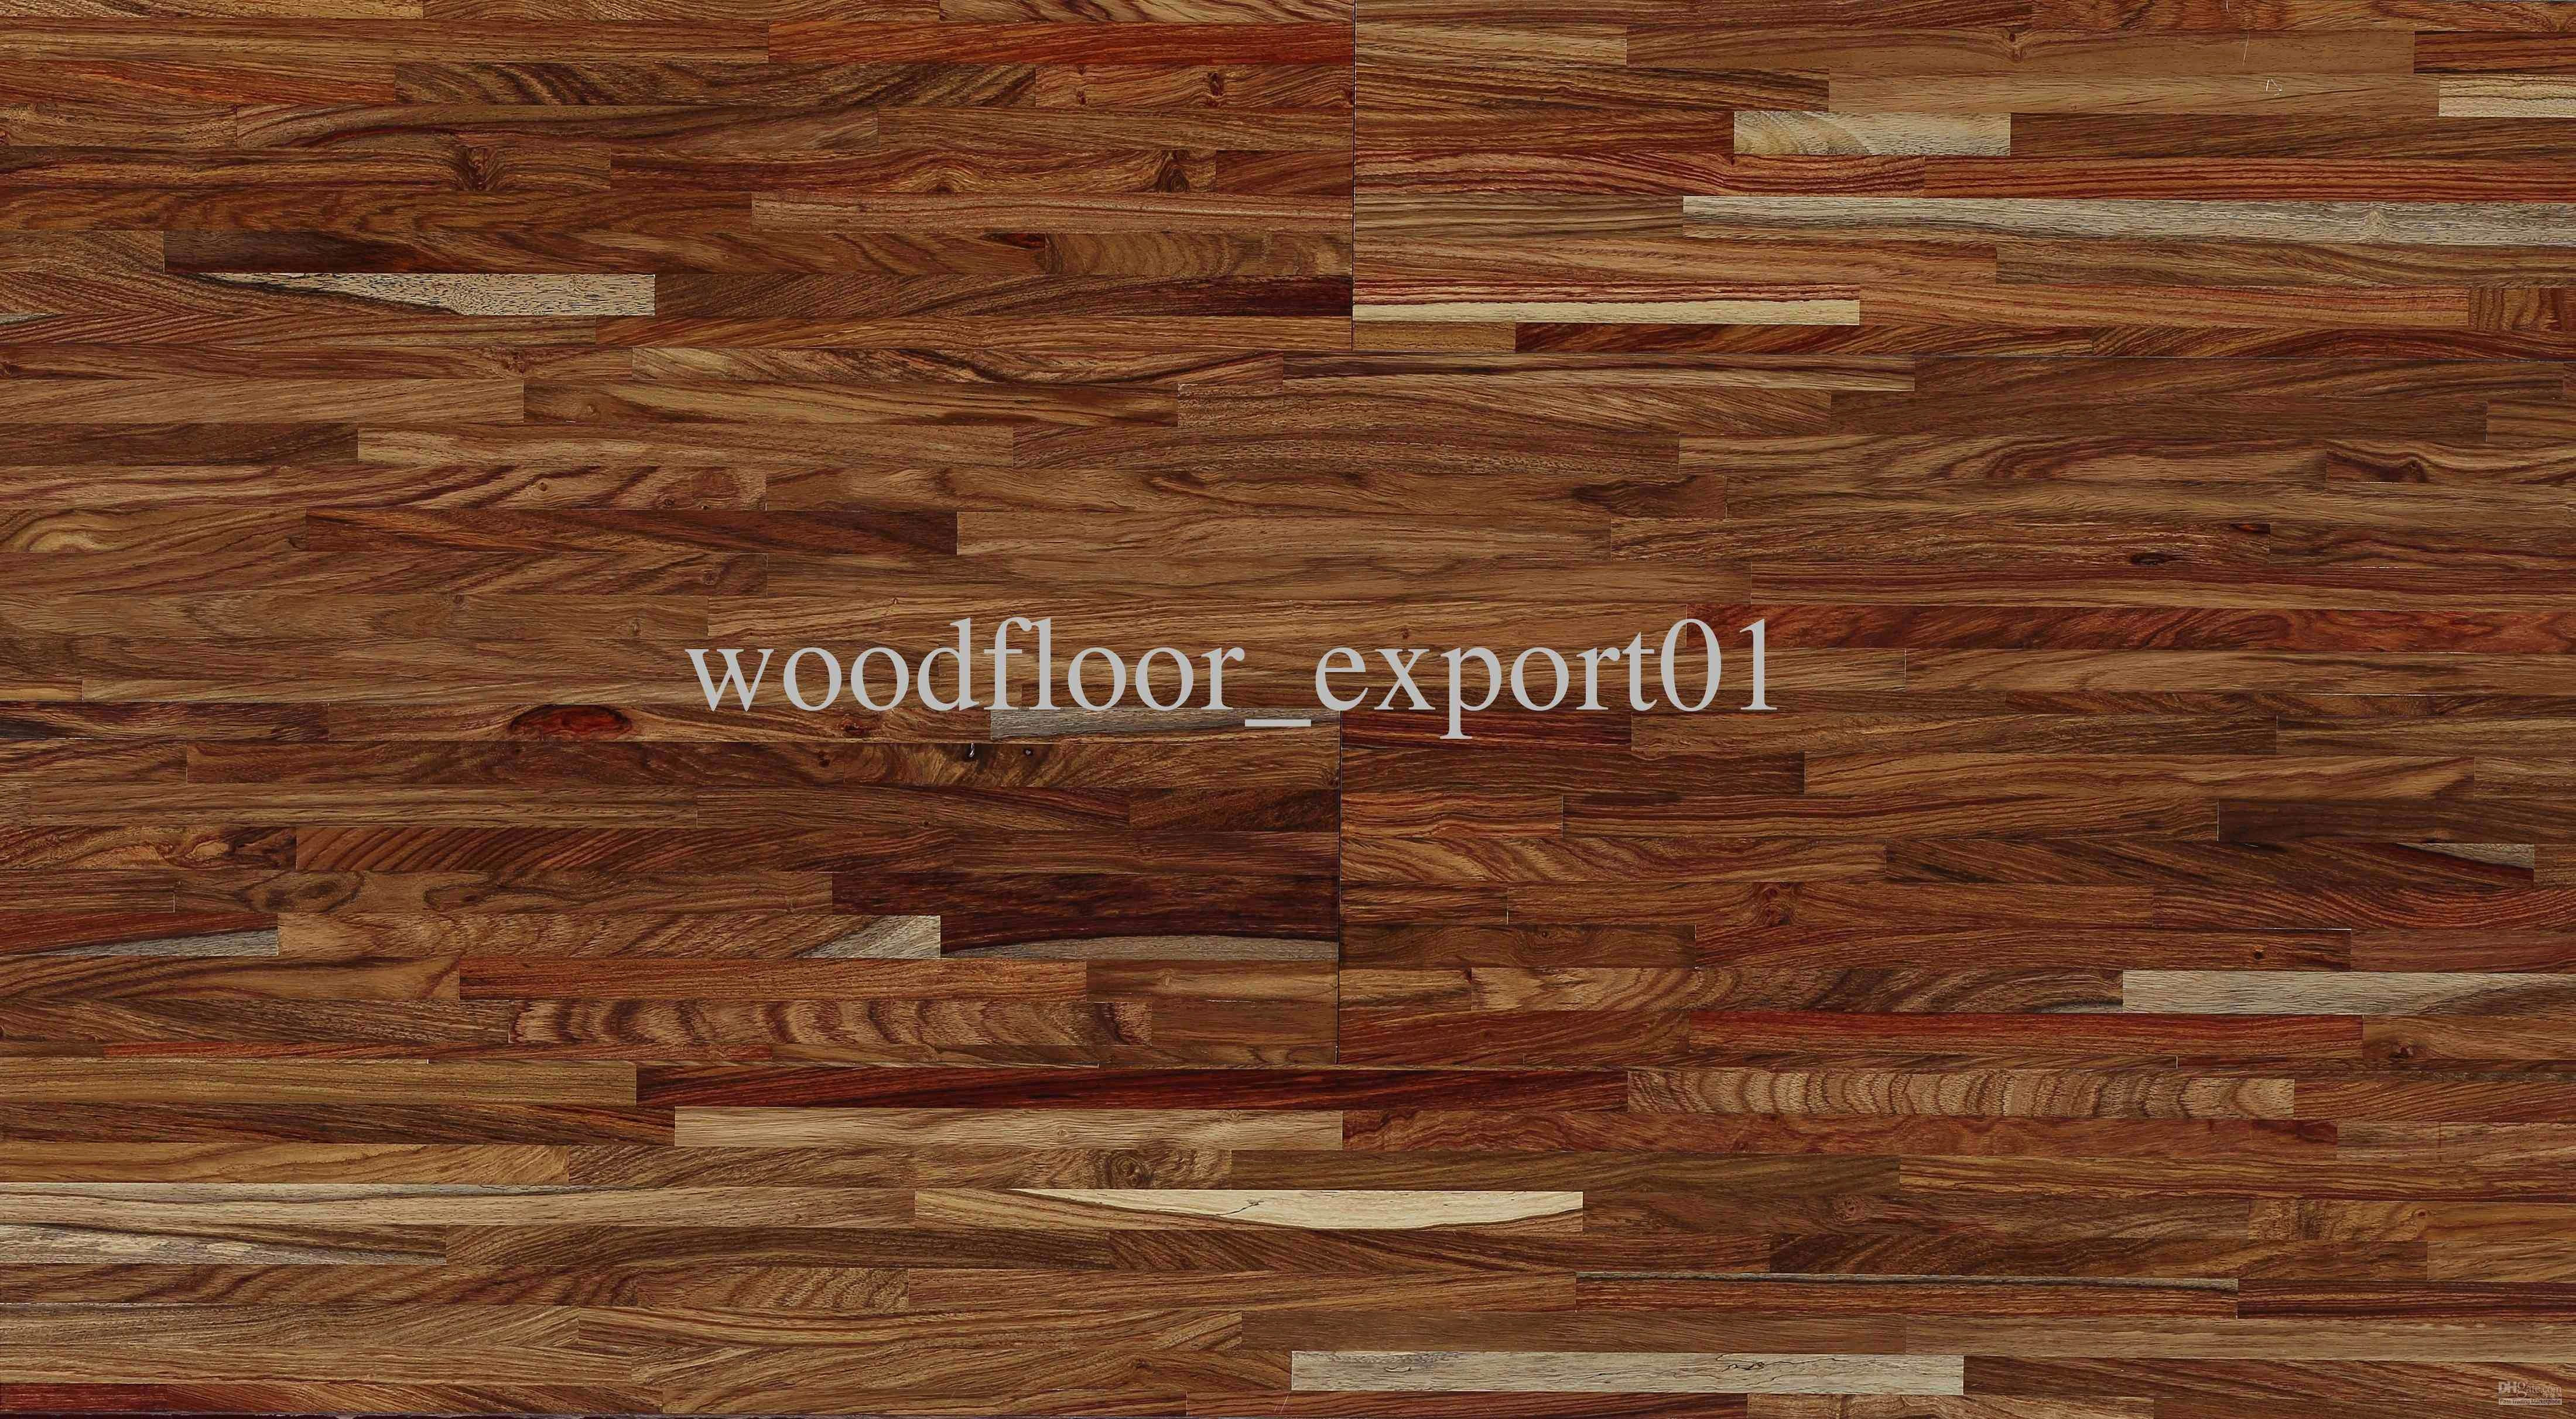 pictures of hardwood and tile floors together of 26 stunning ceramic tile that looks like hardwood floors peritile for hardwood floors options best where to buy hardwood flooring inspirational 0d grace place barnegat